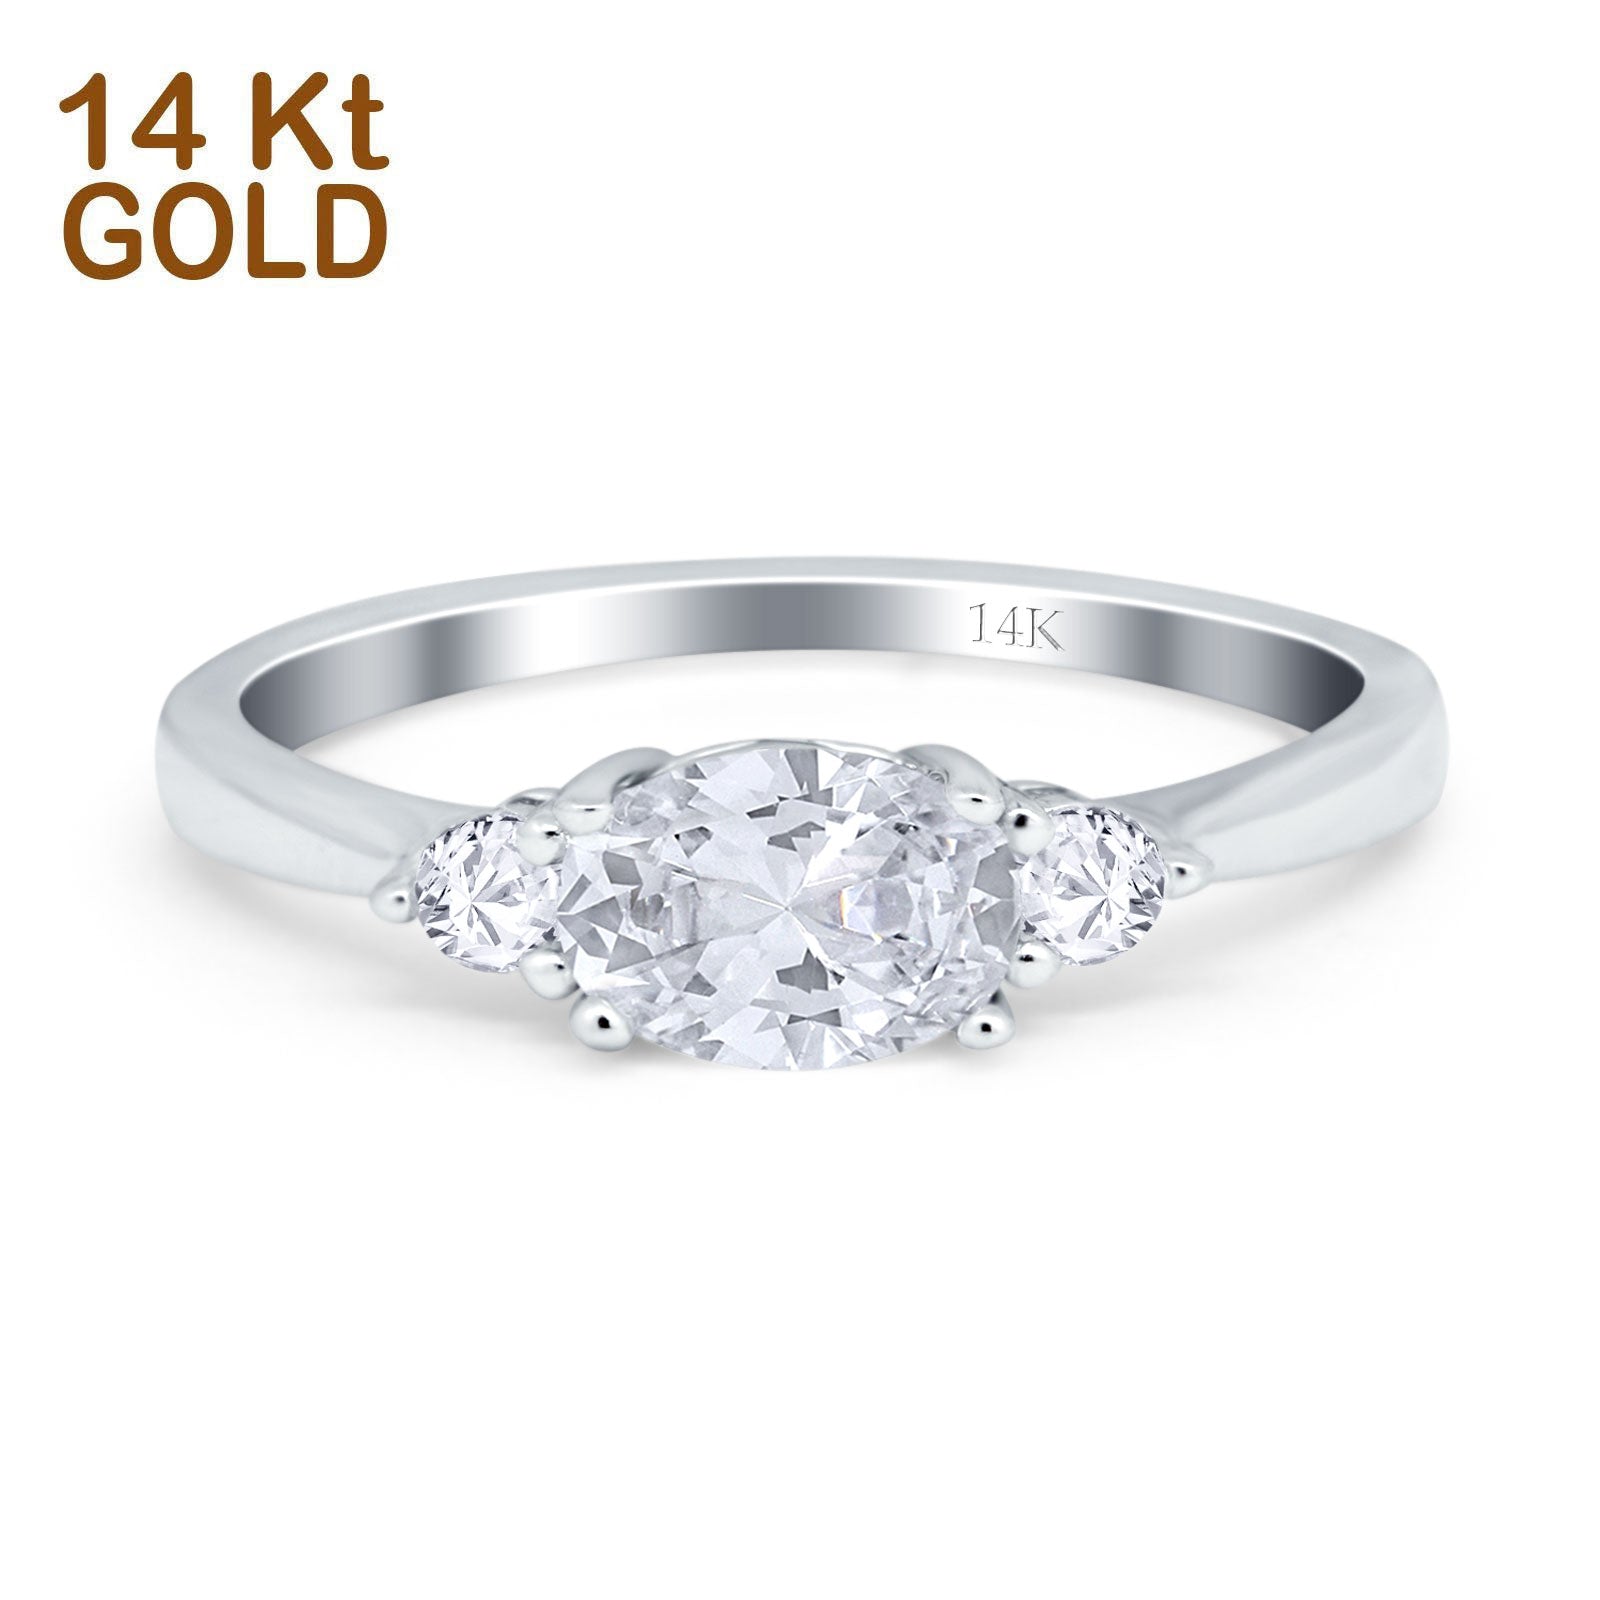 14K Gold Three Stone Oval Simulated Cubic Zirconia Wedding Engagement Ring